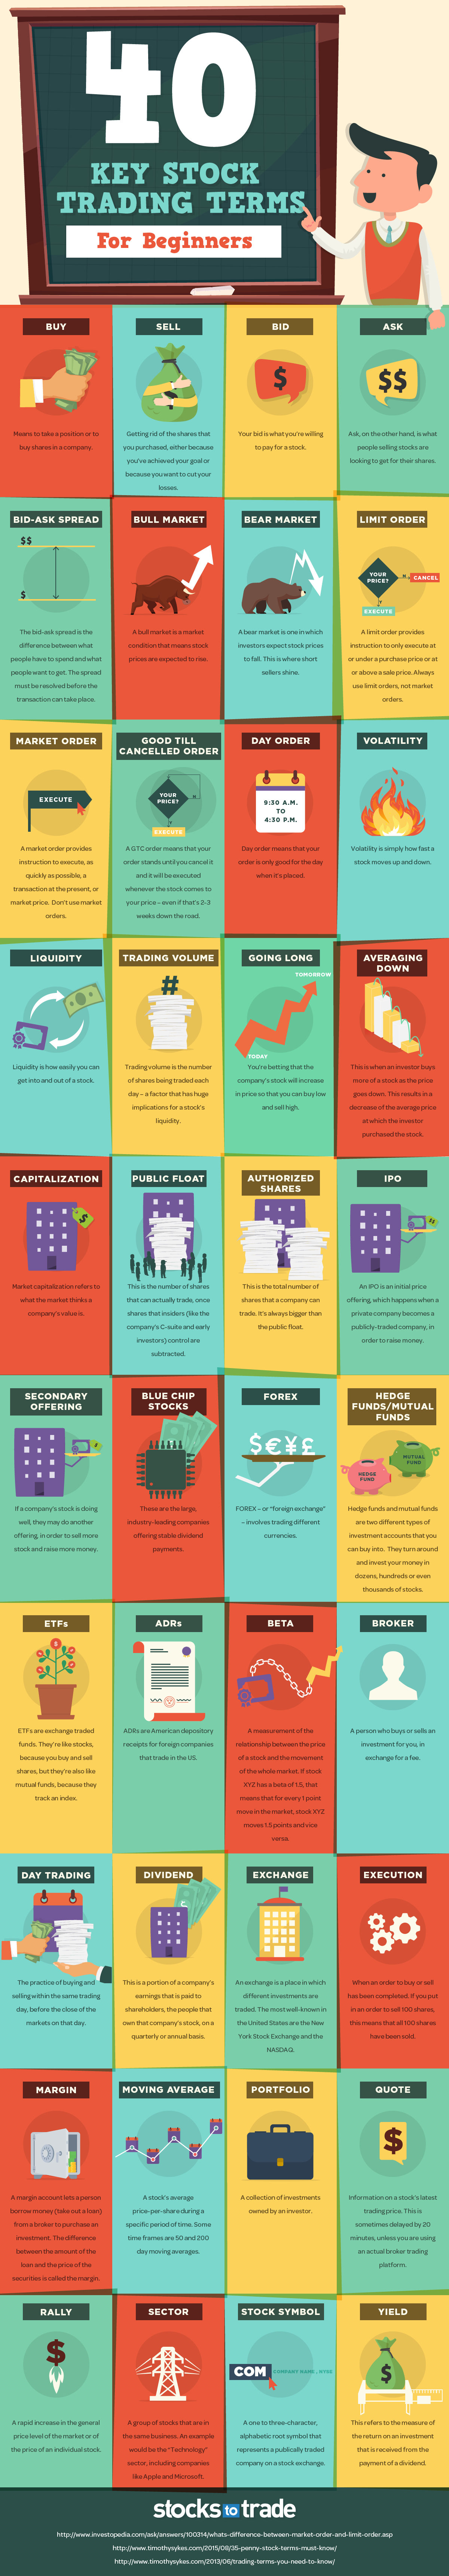 40 stock market terms for beginners - infographic